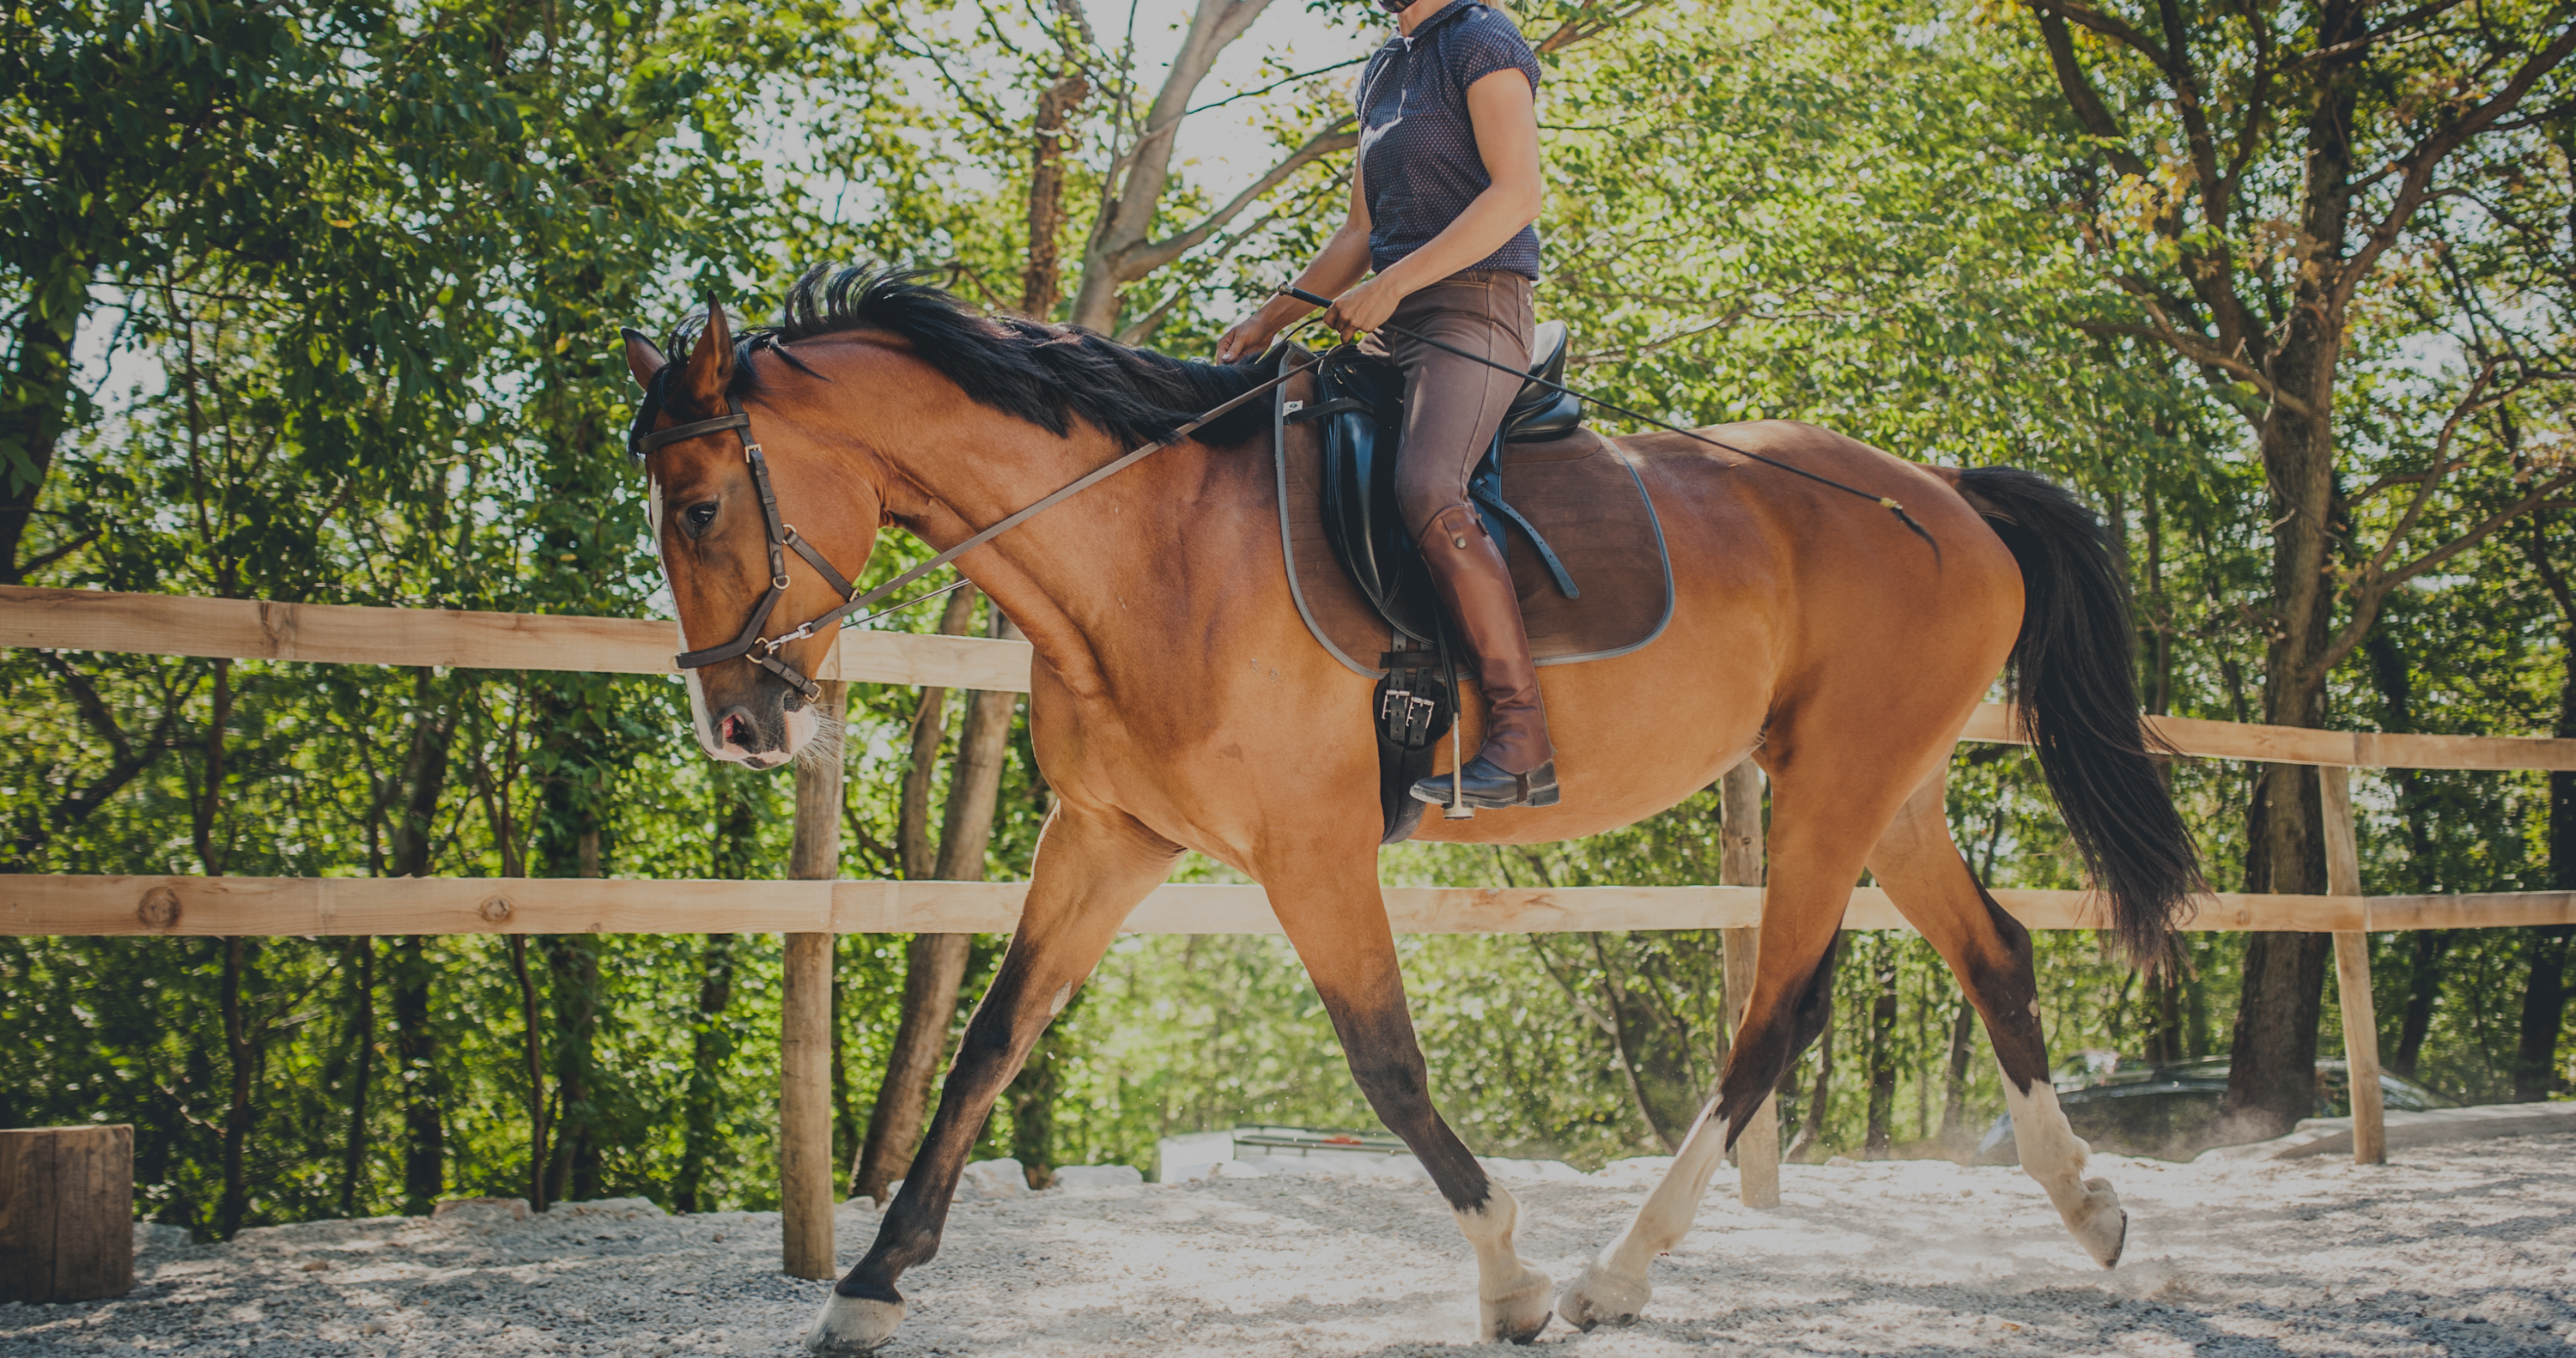 dressage fashion, outfits for horseback riding